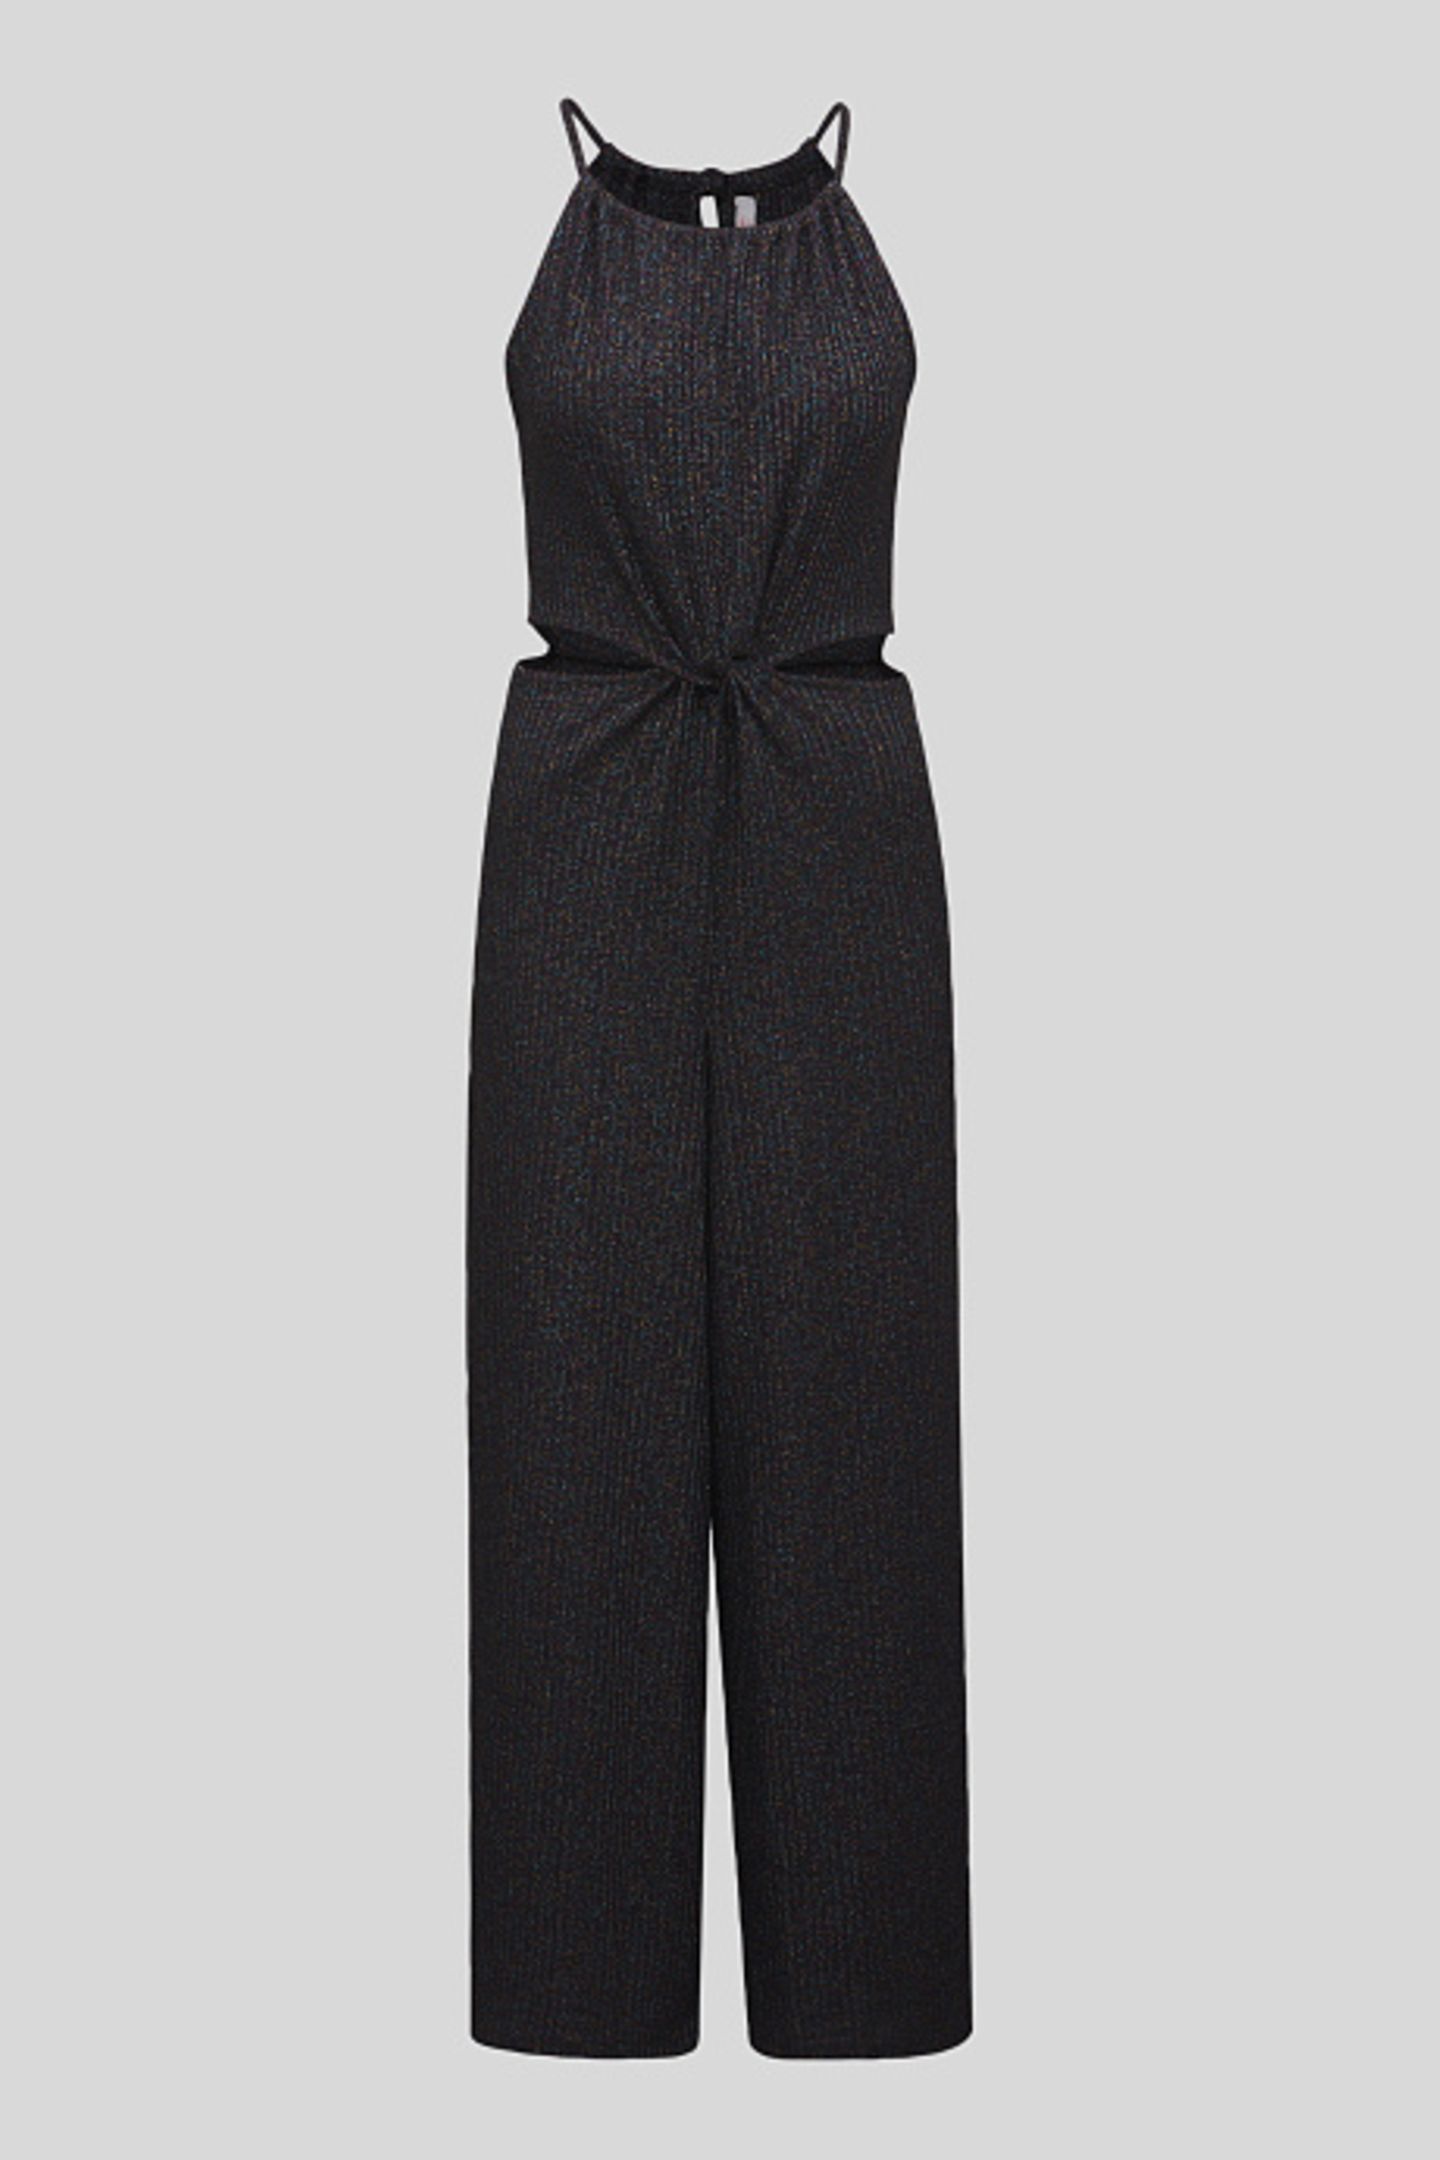 silvester outfit jumpsuit